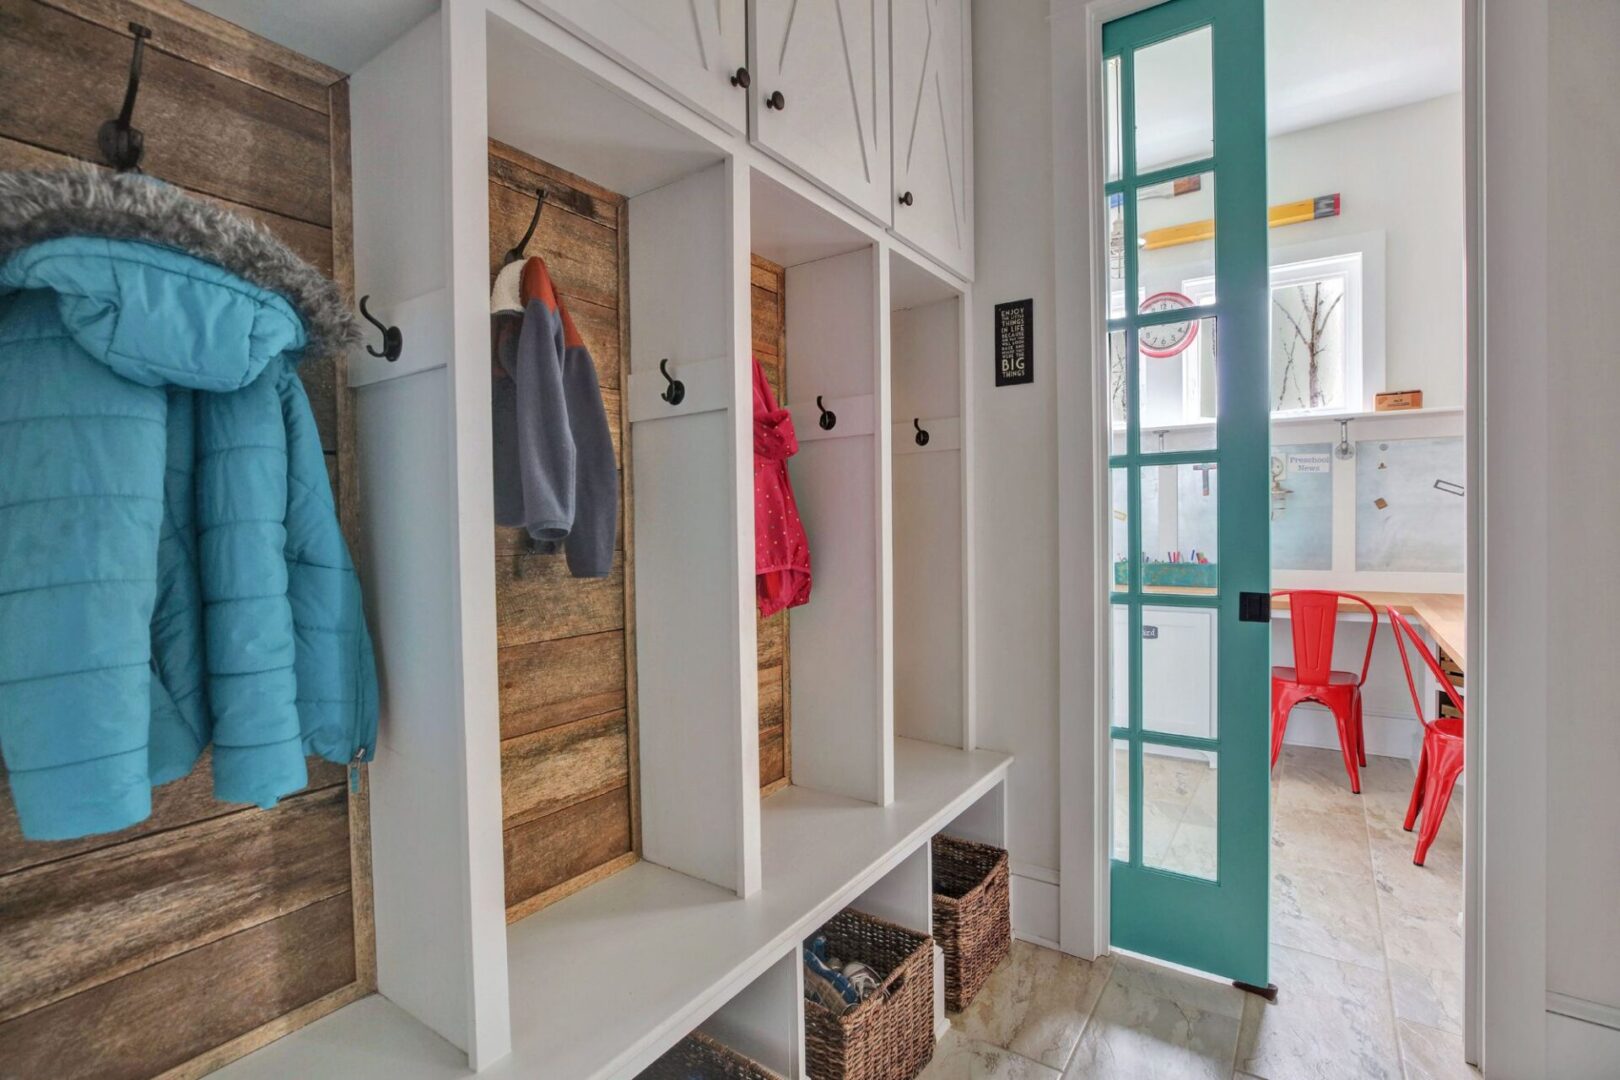 A room with many shelves and hooks for coats